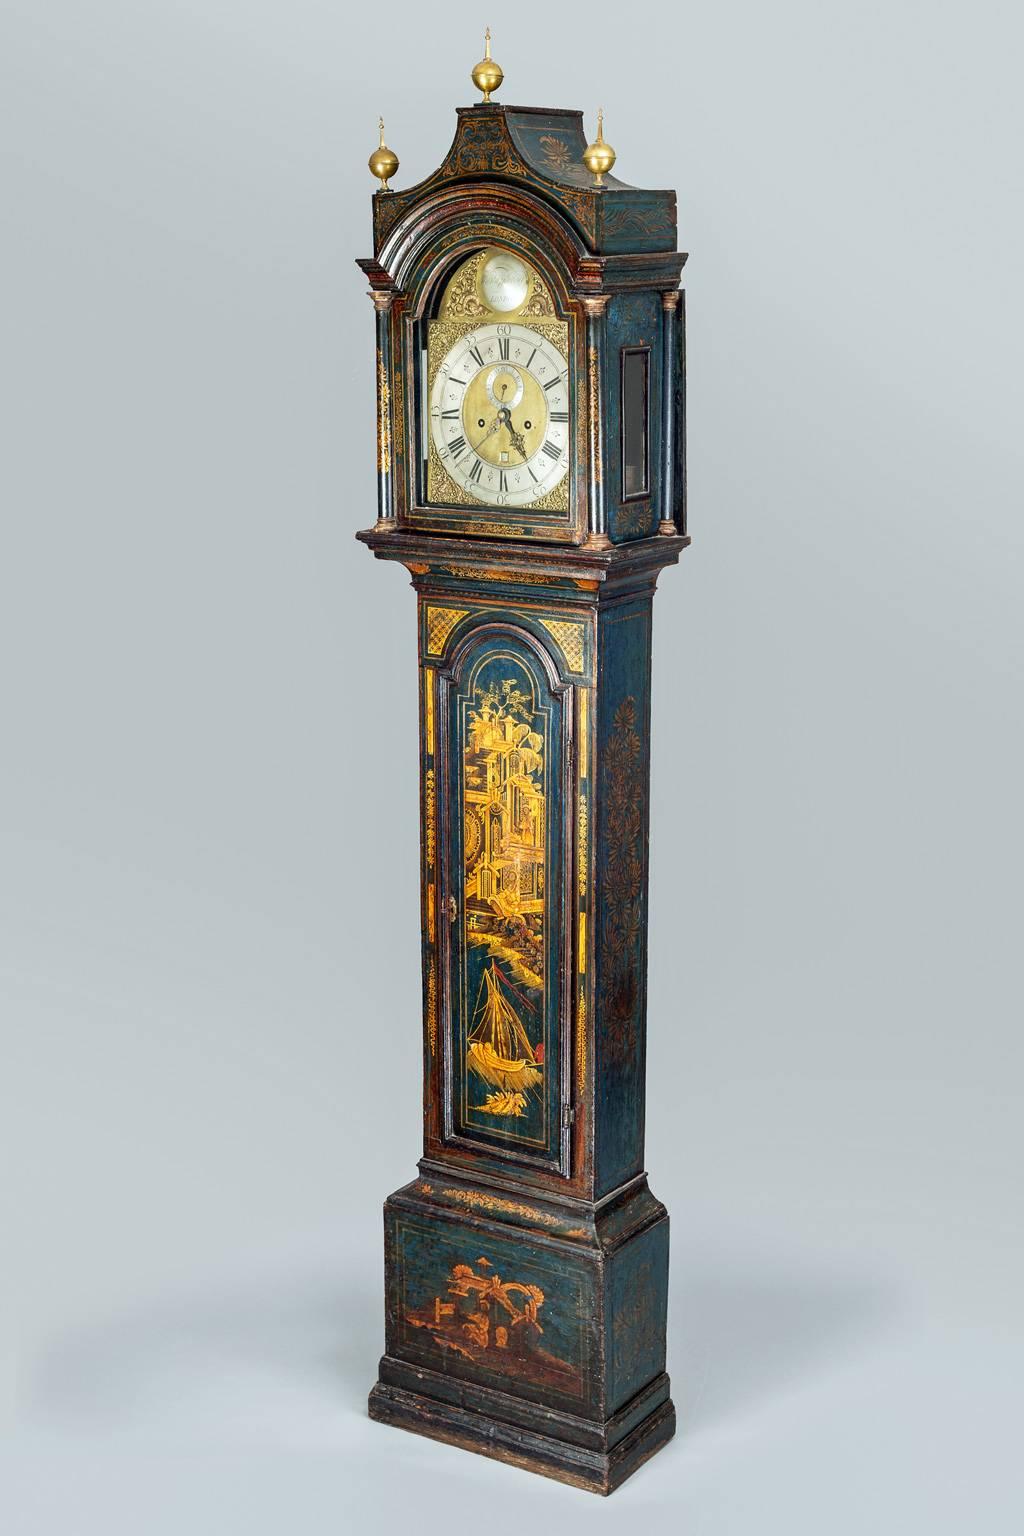 George II blue lacquered tall case clock inscribed Wm. Stapleton, London. It has an eight-day movement with twin train and anchor escapement, striking on a bell, brass dial with silvered chapter ring and Roman chapters, seconds dial and date